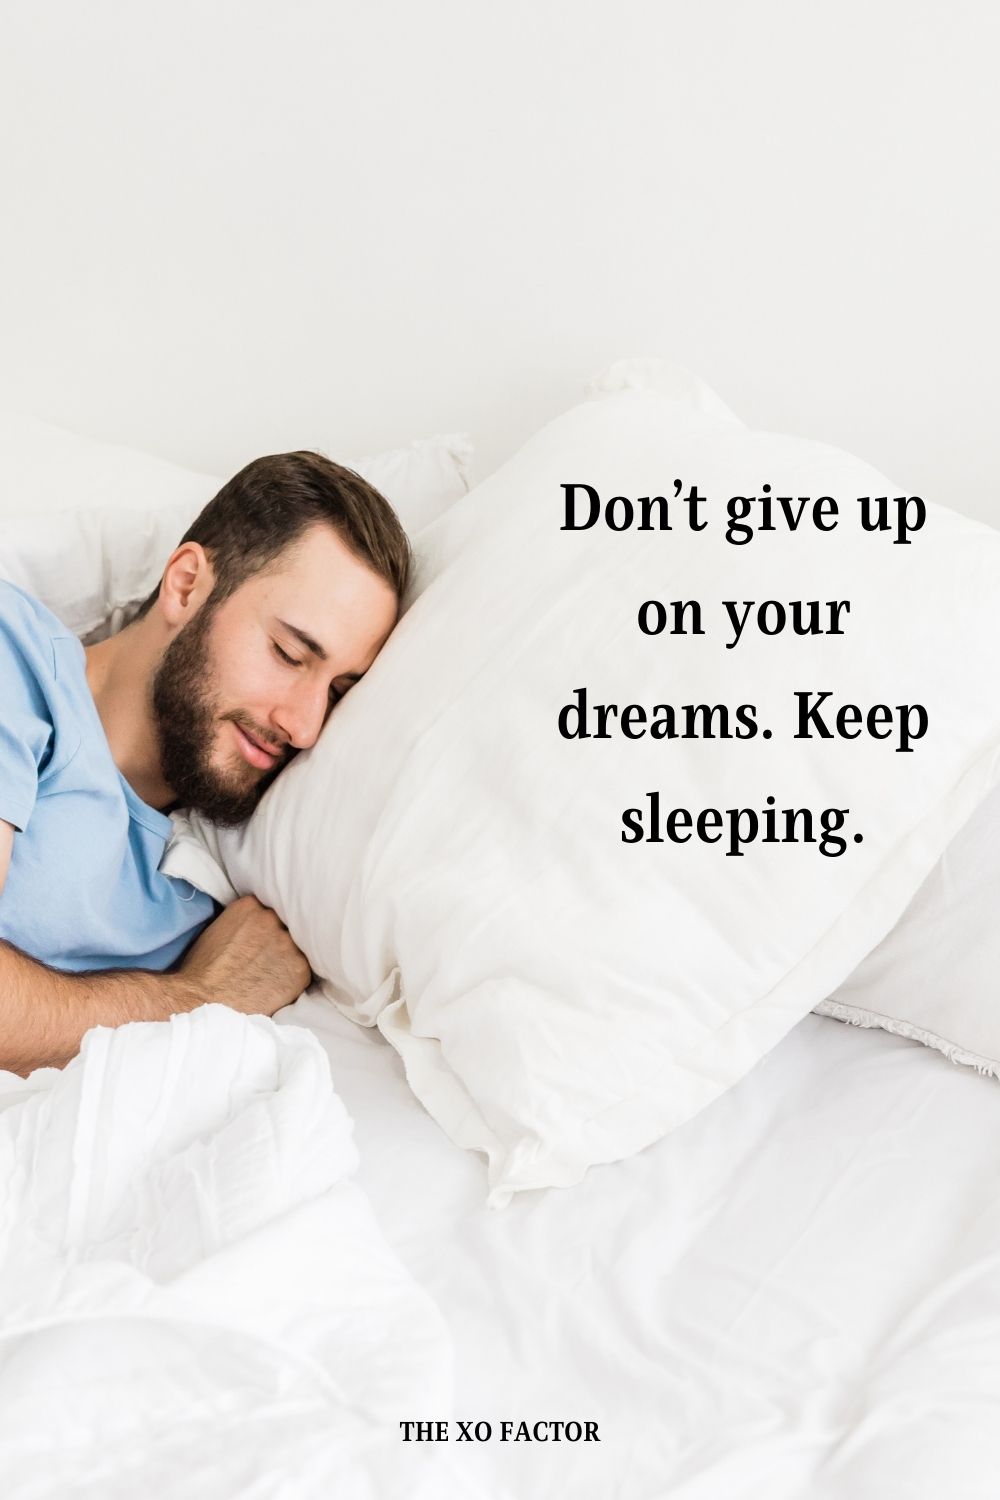 Don’t give up on your dreams. Keep sleeping.